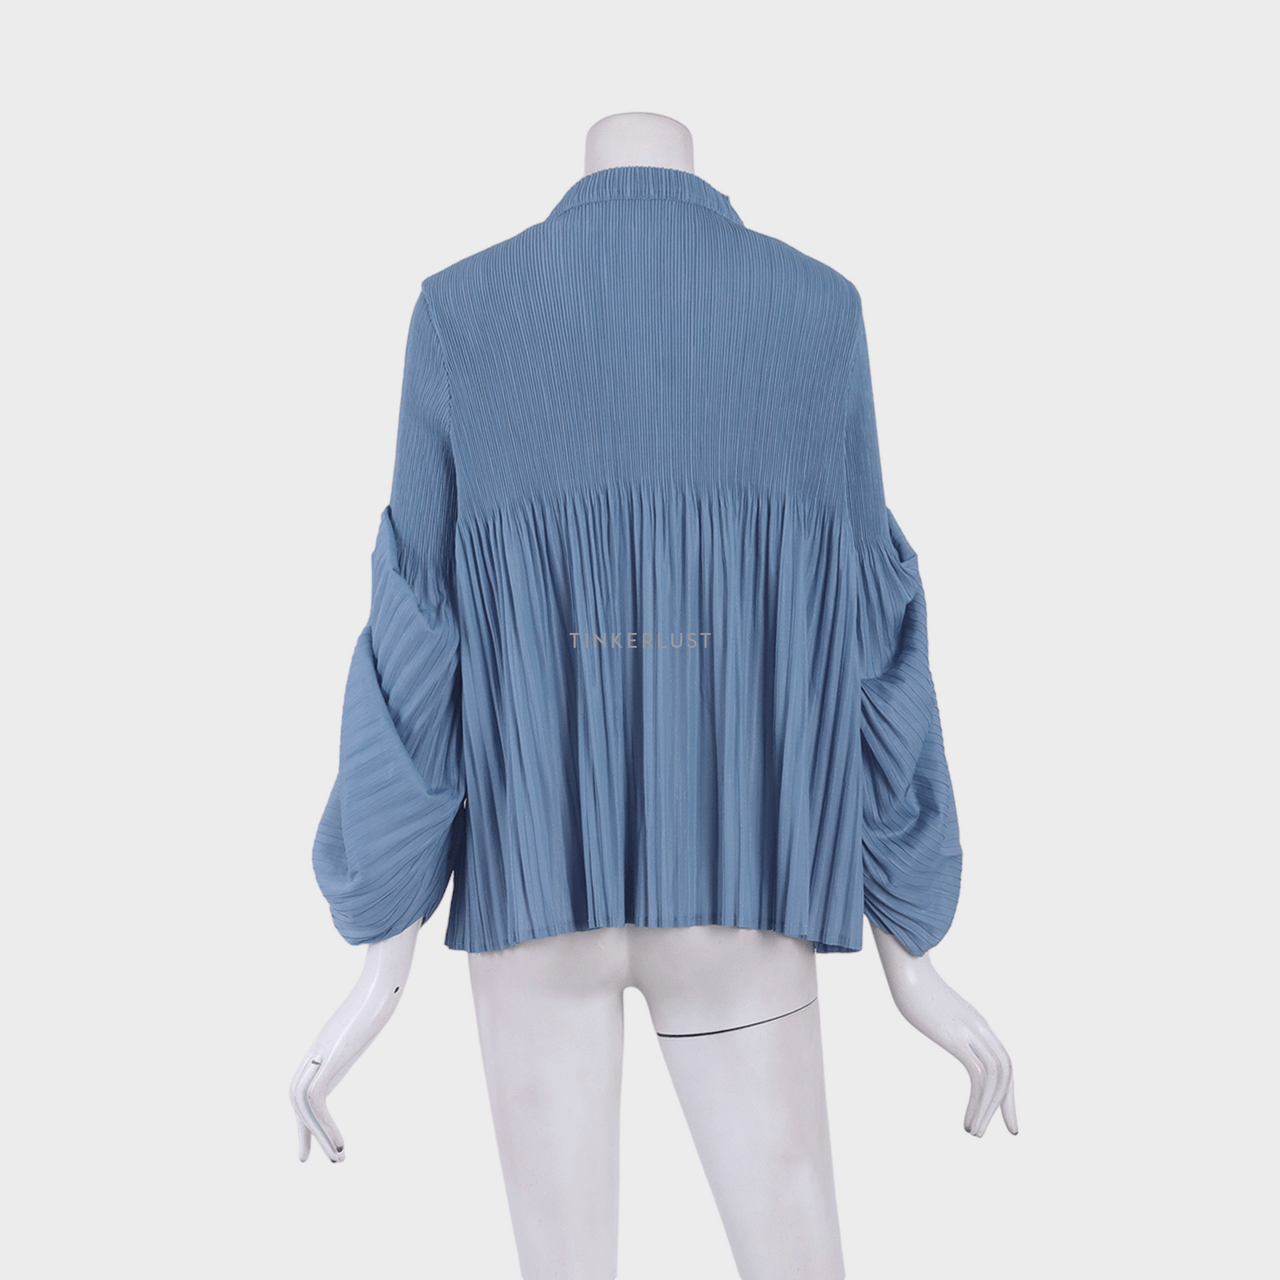 Orgeo Official Blue Blouse